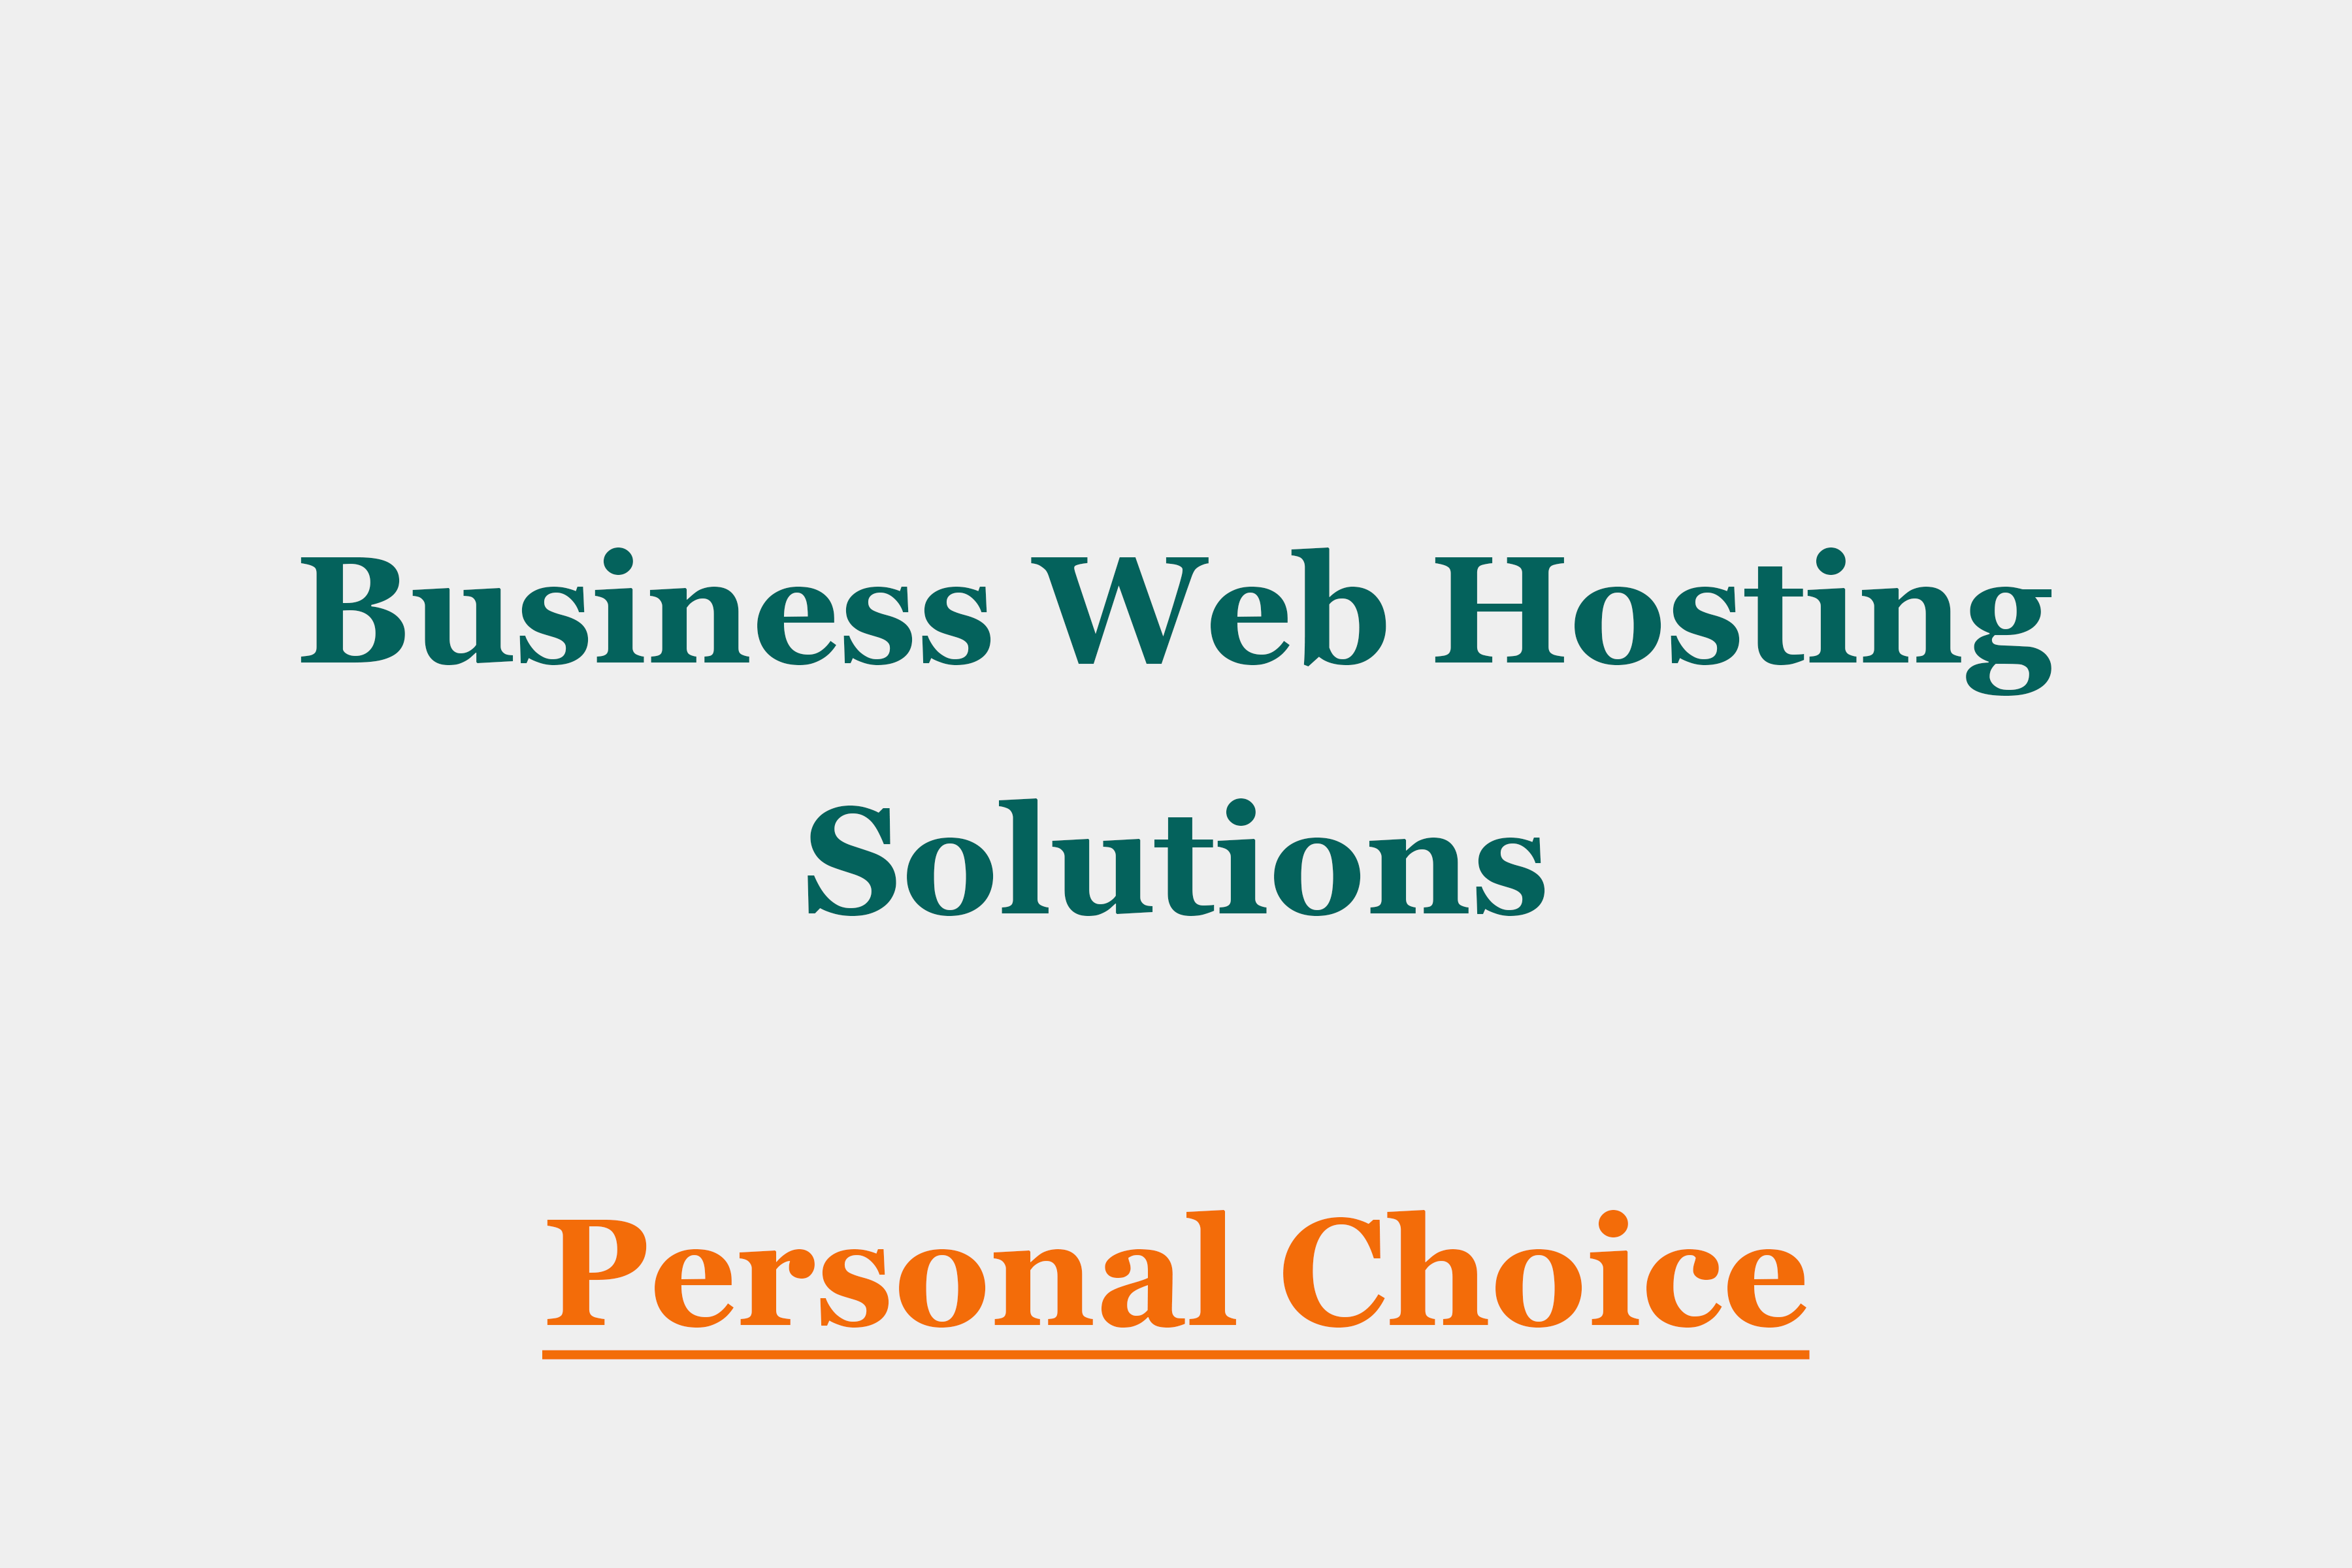 business web hosting solutions.png